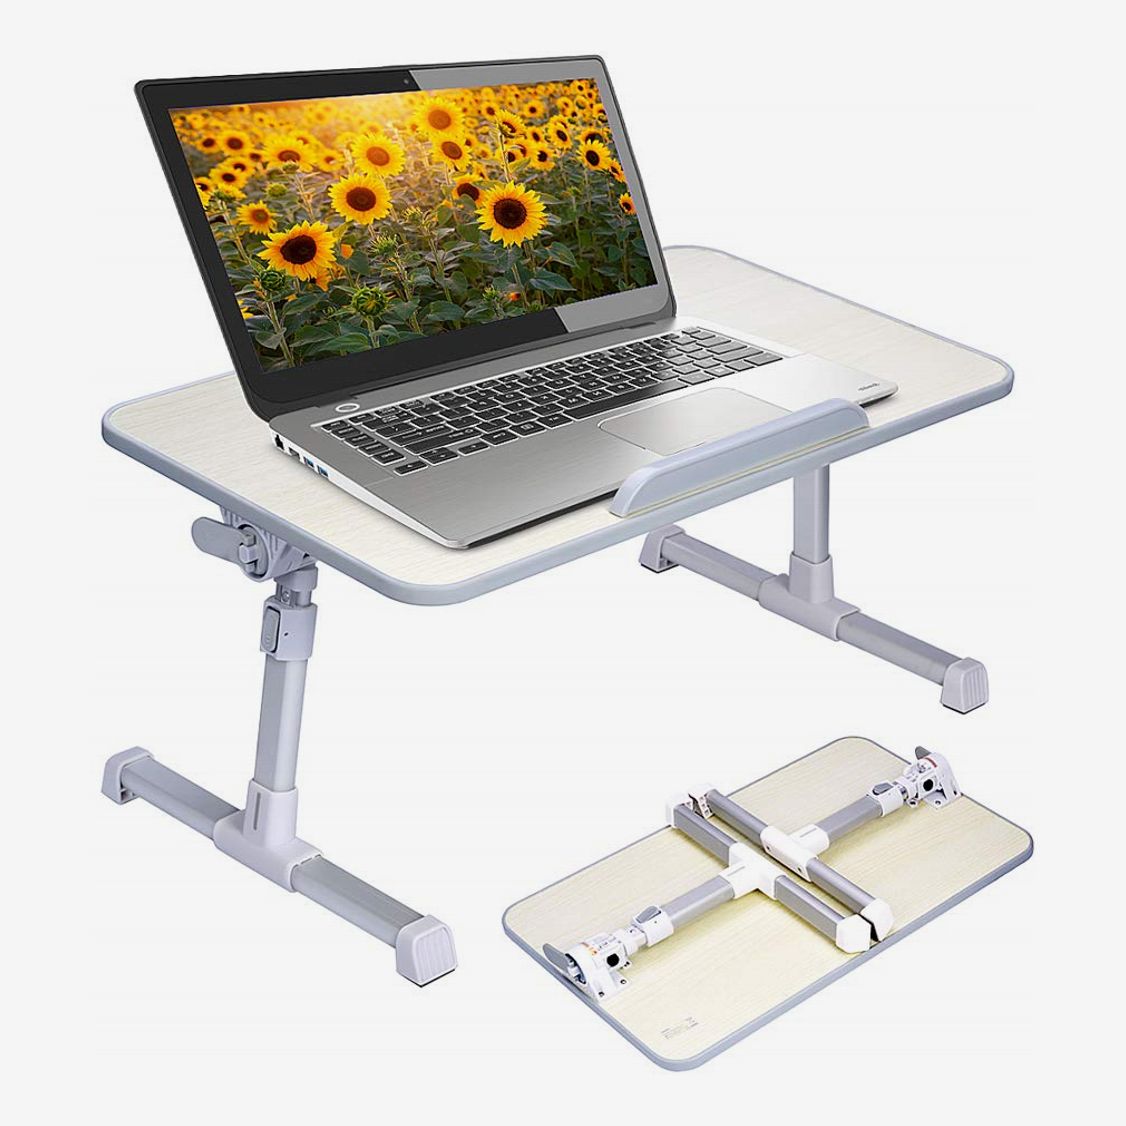 Adjustable Portable Folding Table Home Bed Desk Stand For Computer Laptop PC US 